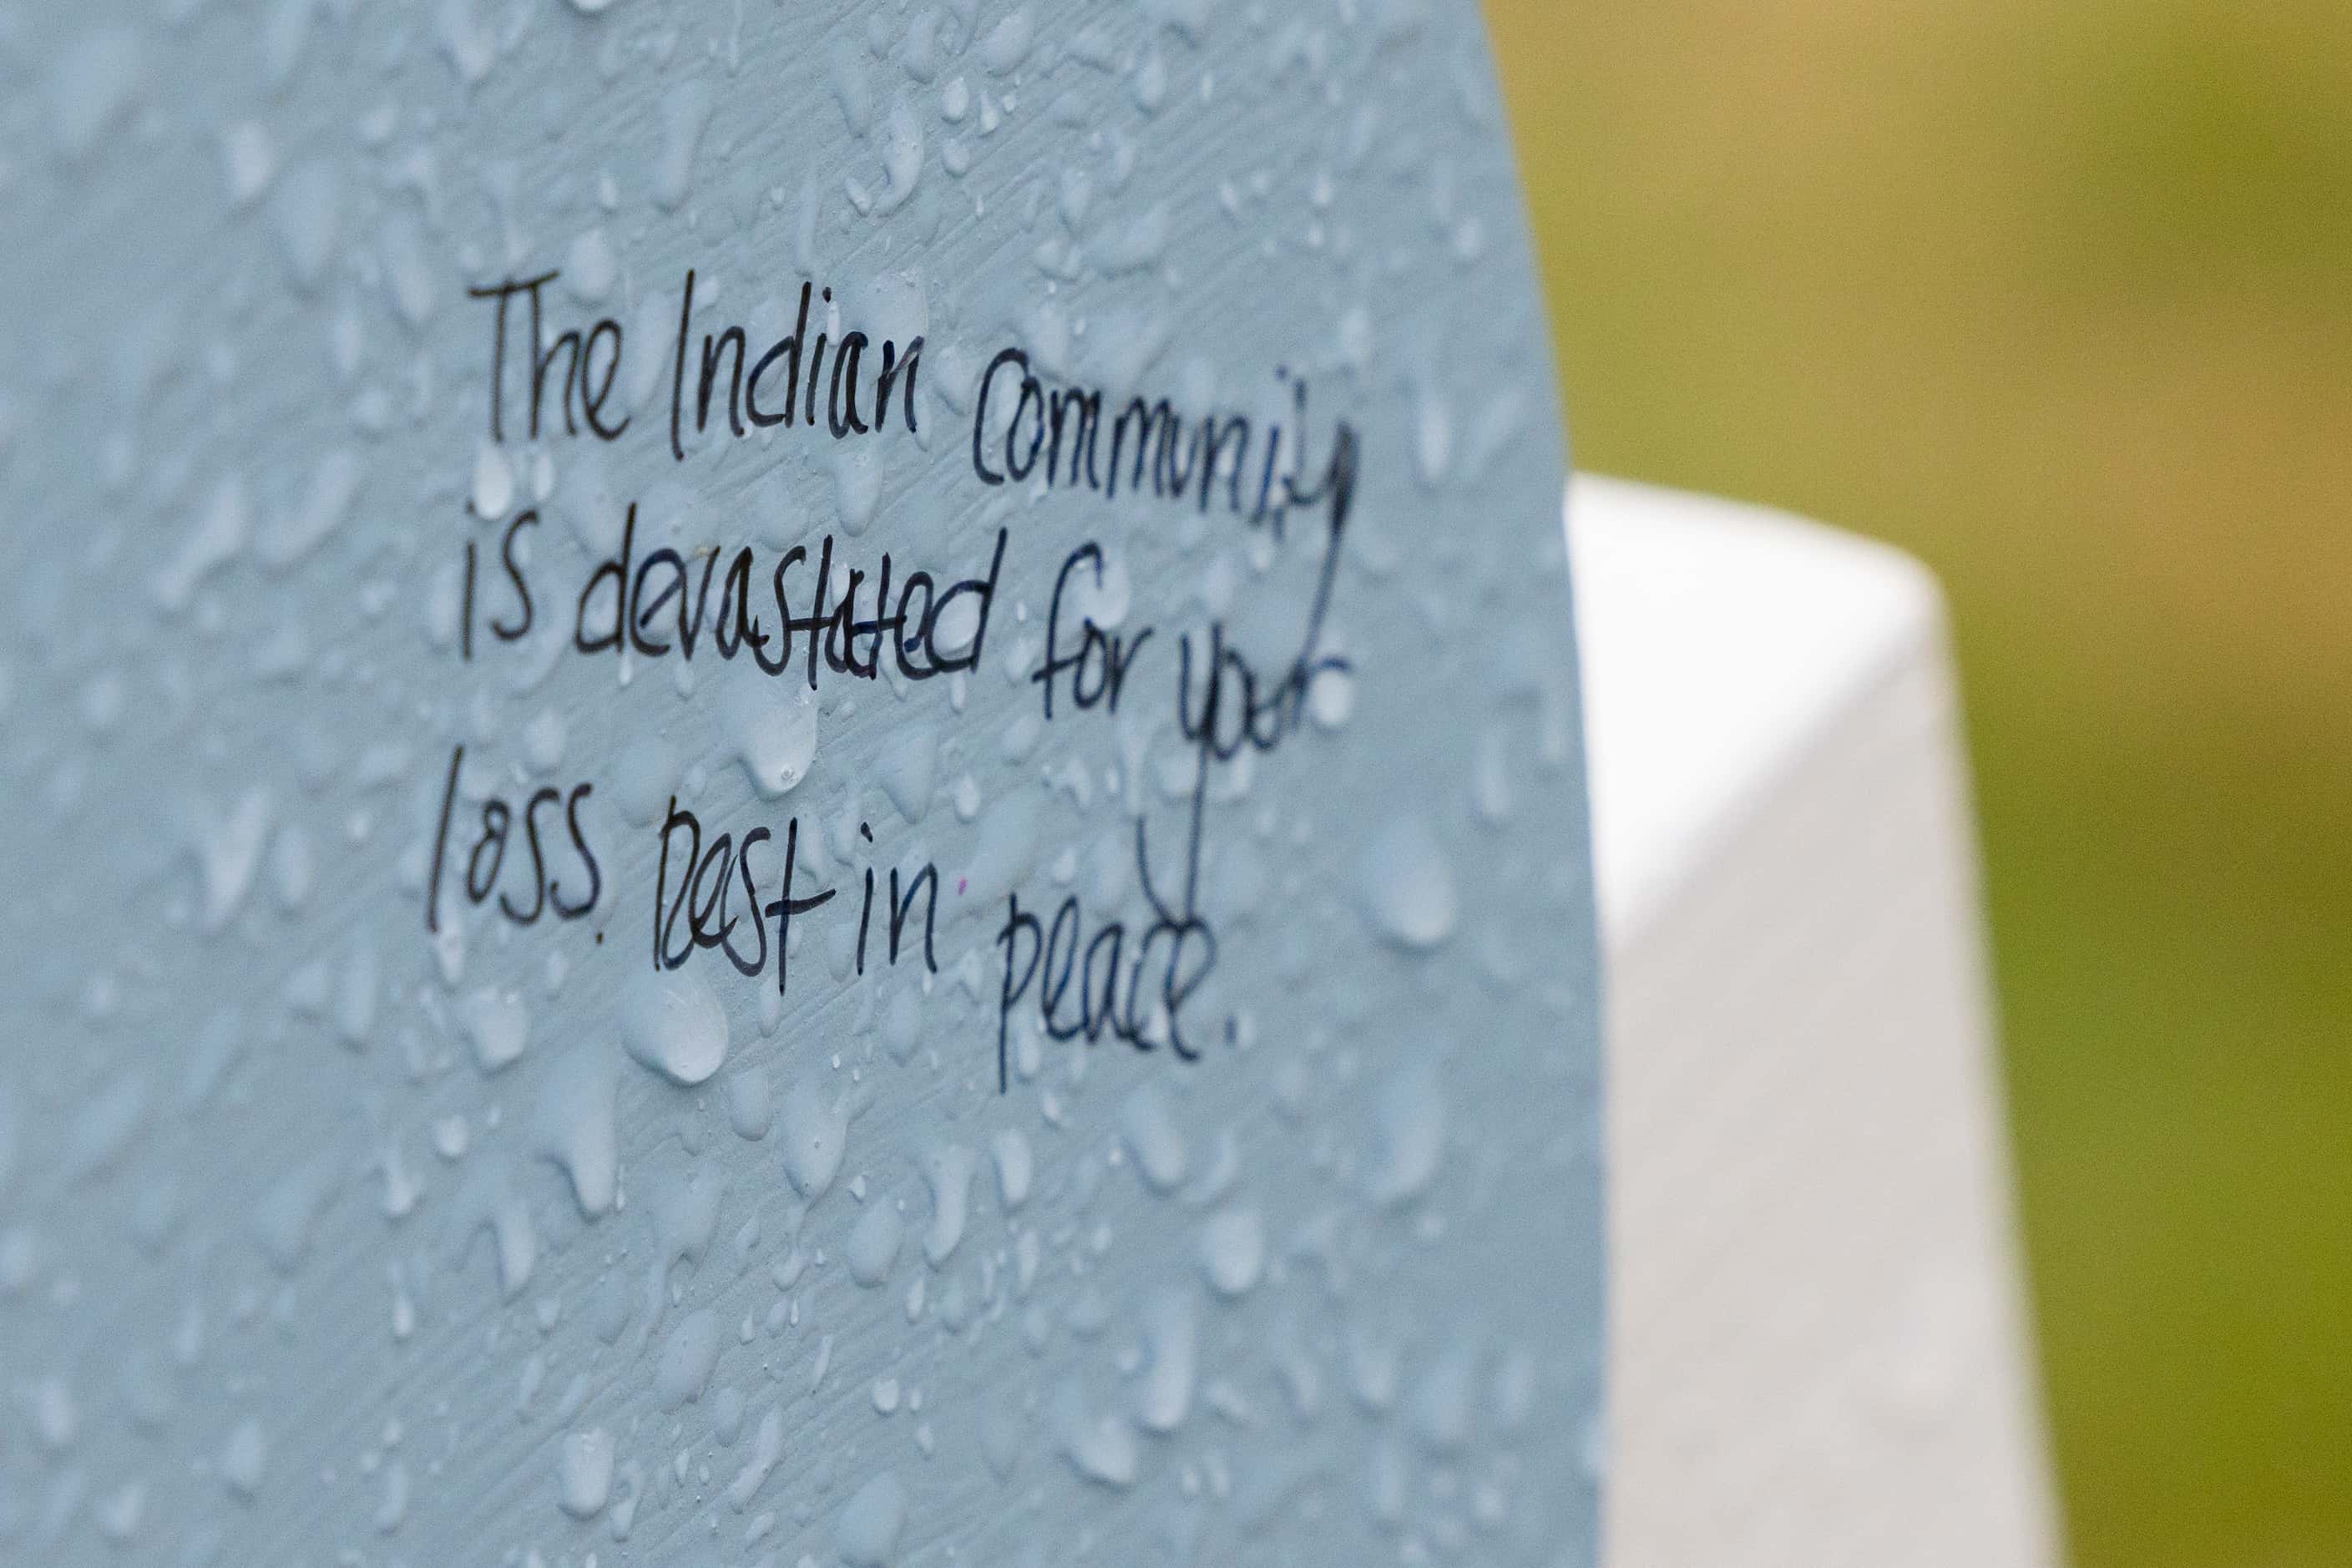 A message saying, “The Indian community is devastated for your loss. Rest in peace,” on the...